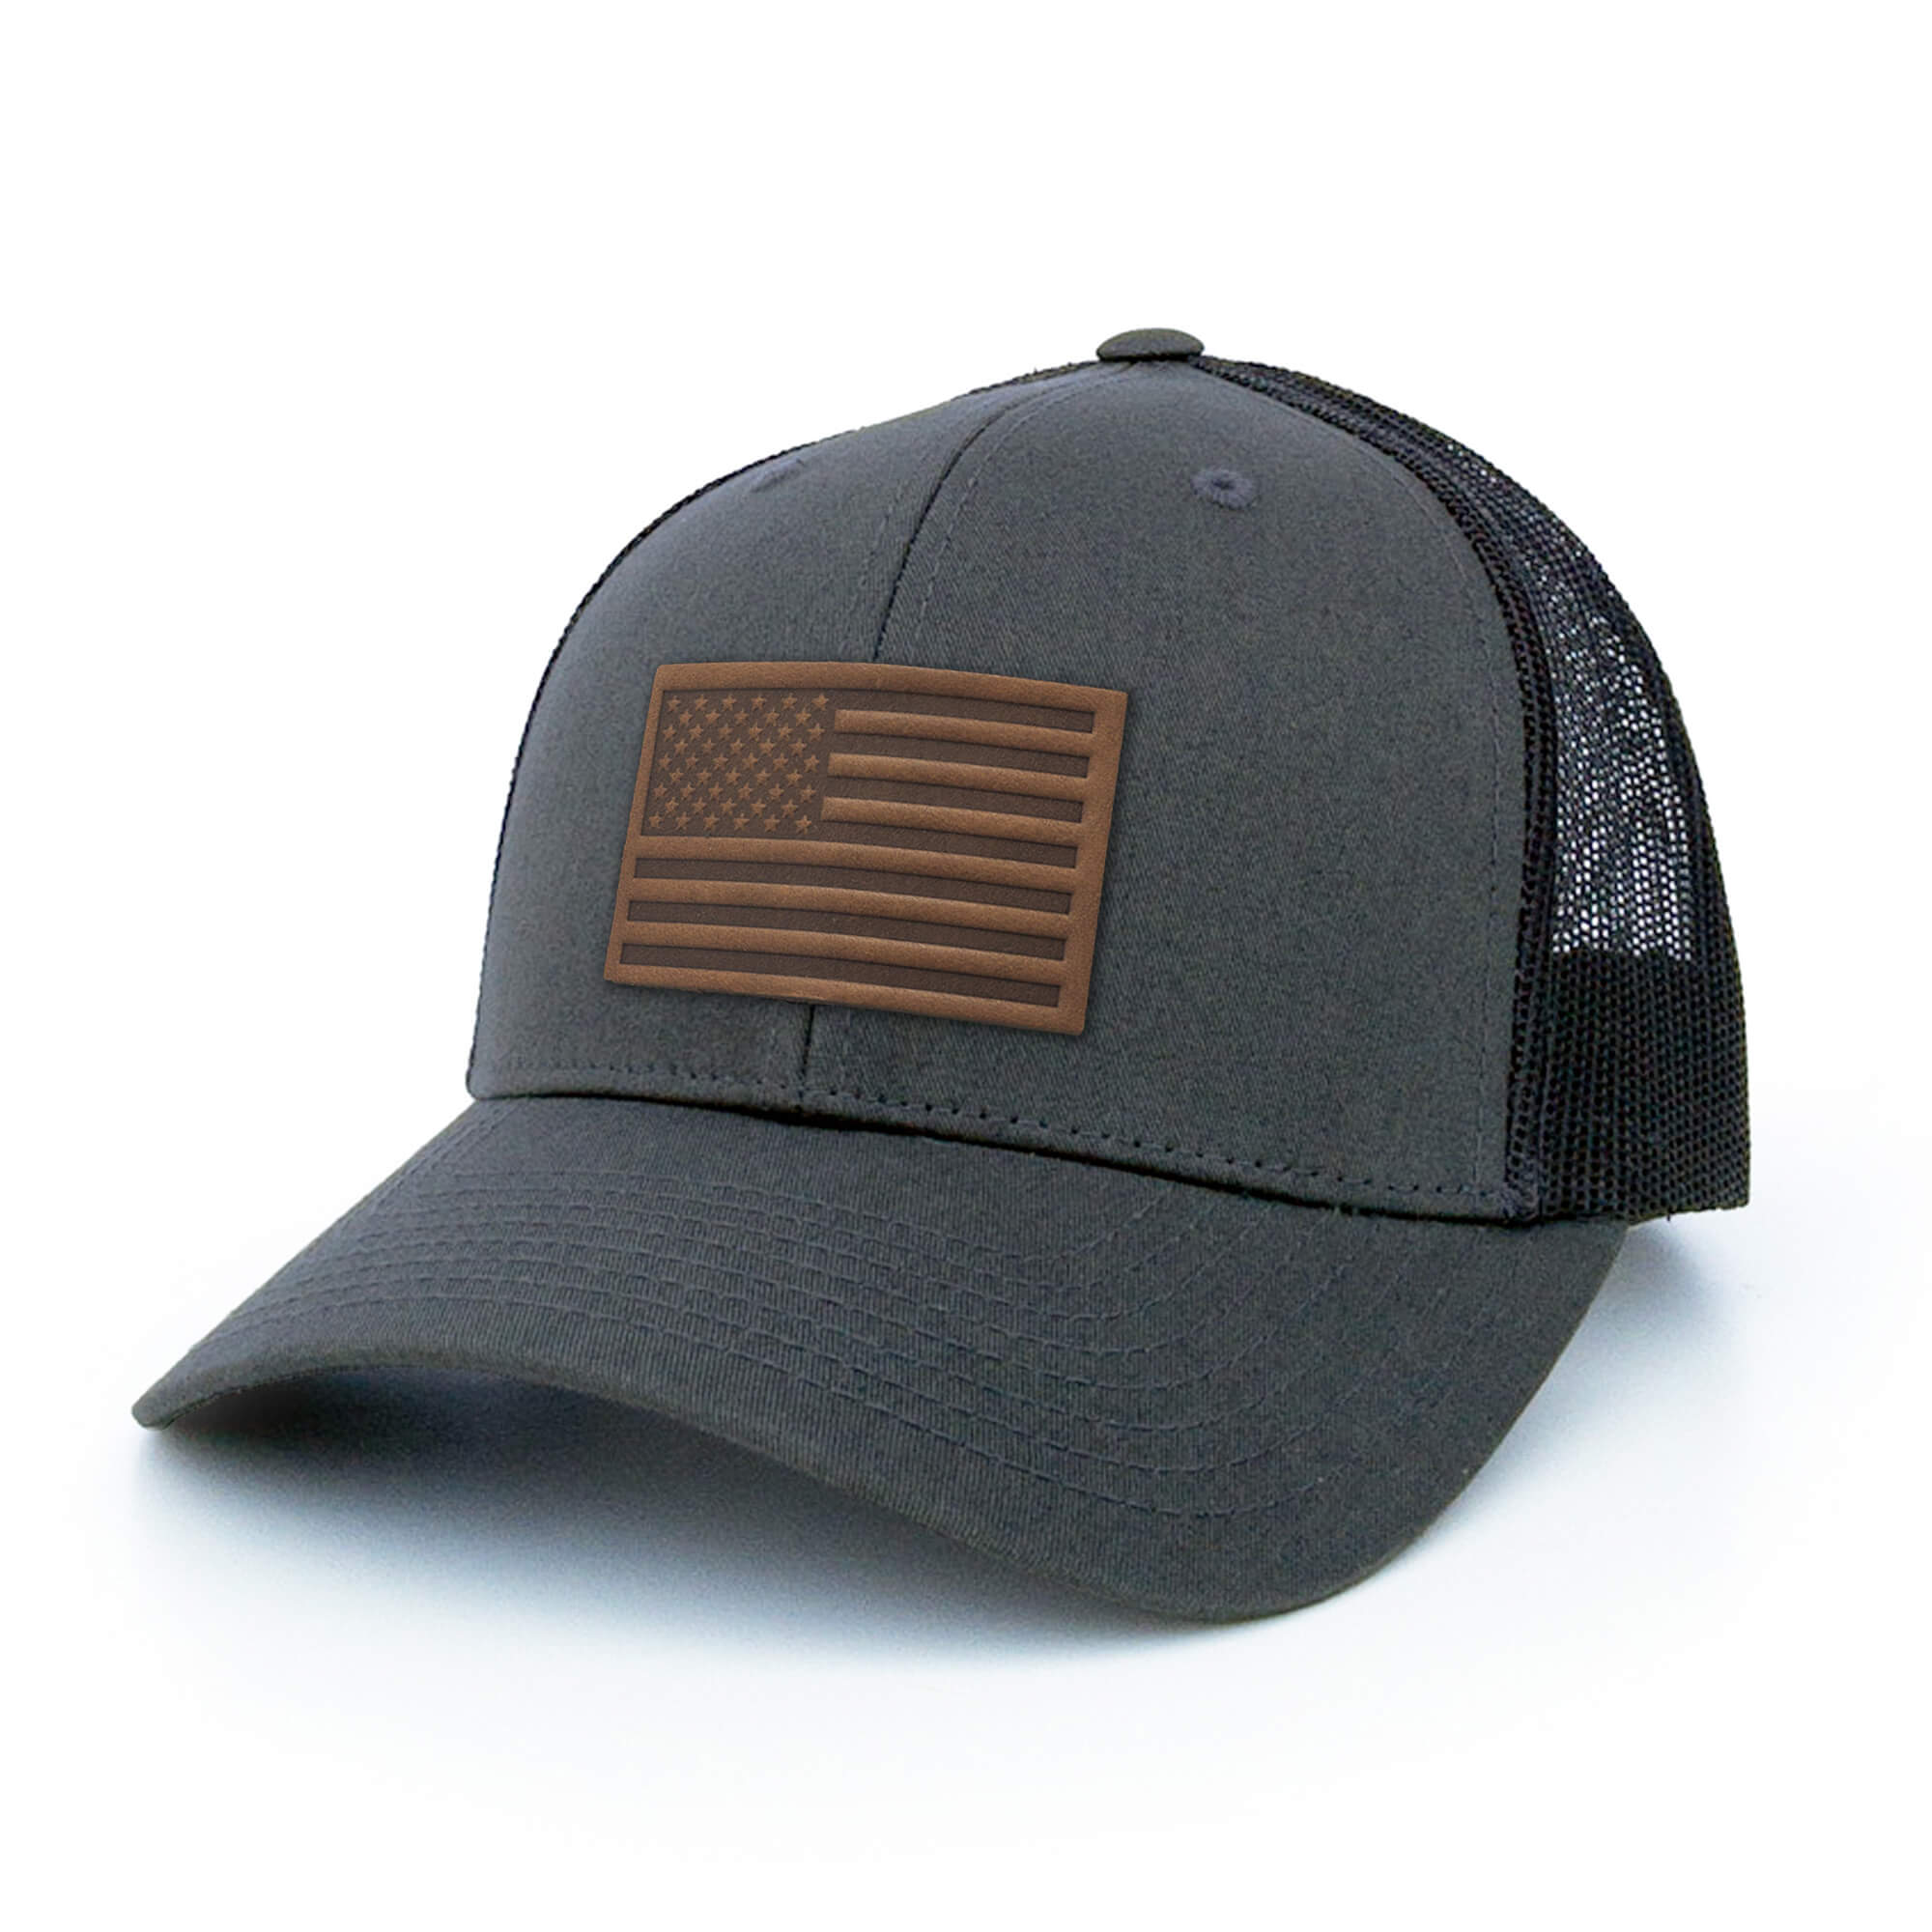 Charcoal trucker hat with full-grain leather patch of USA Flag | BLACK-003-012, CHARC-003-012, NAVY-003-012, HGREY-003-012, MOSS-003-012, BROWN-003-012